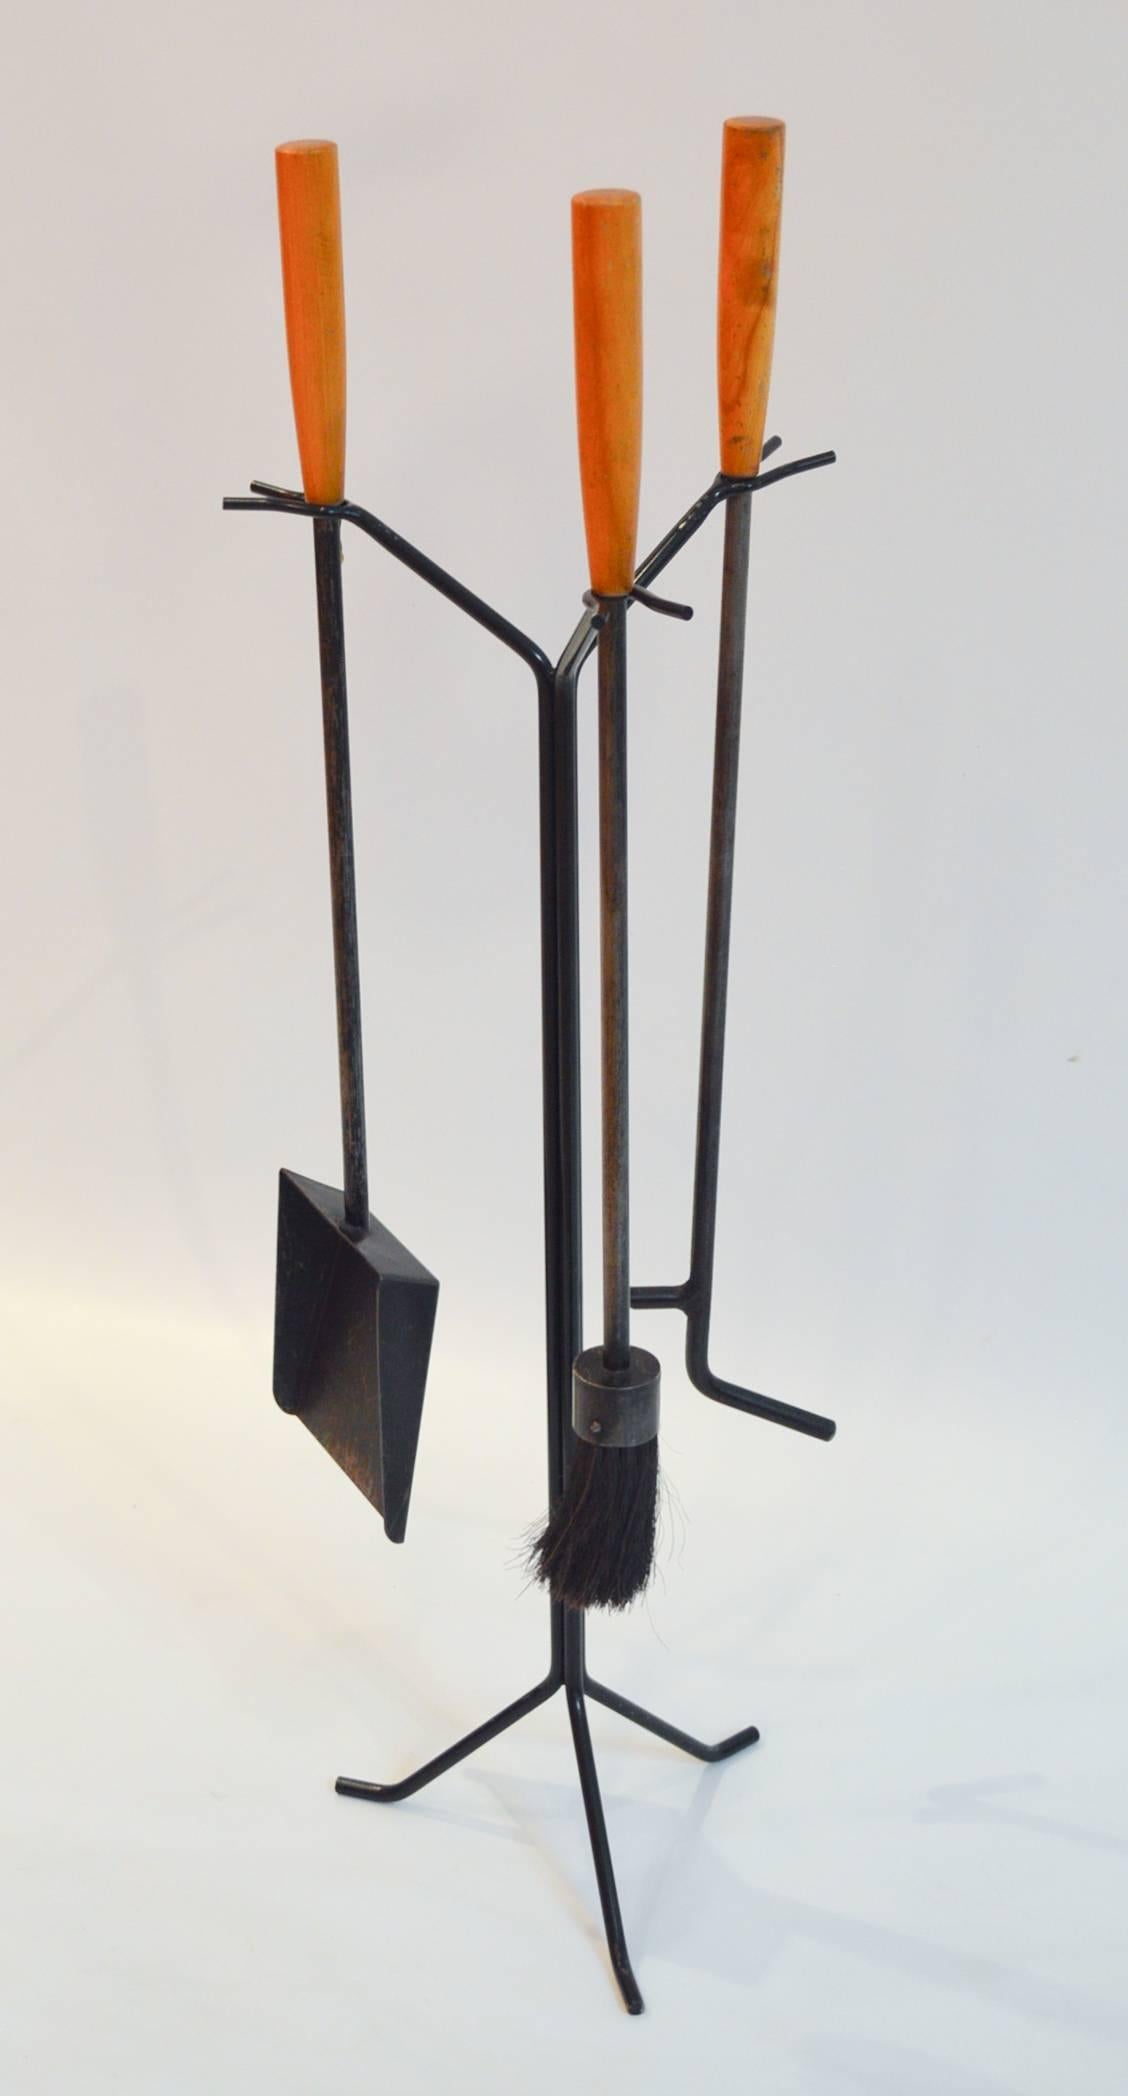 Mid-century modern set of enameled steel and birch fireplace tools designed by George Nelson. The set is comprised of a poker, shovel, and brush; the stand is new and made to the original's measurements and specifications. Price is for the set.